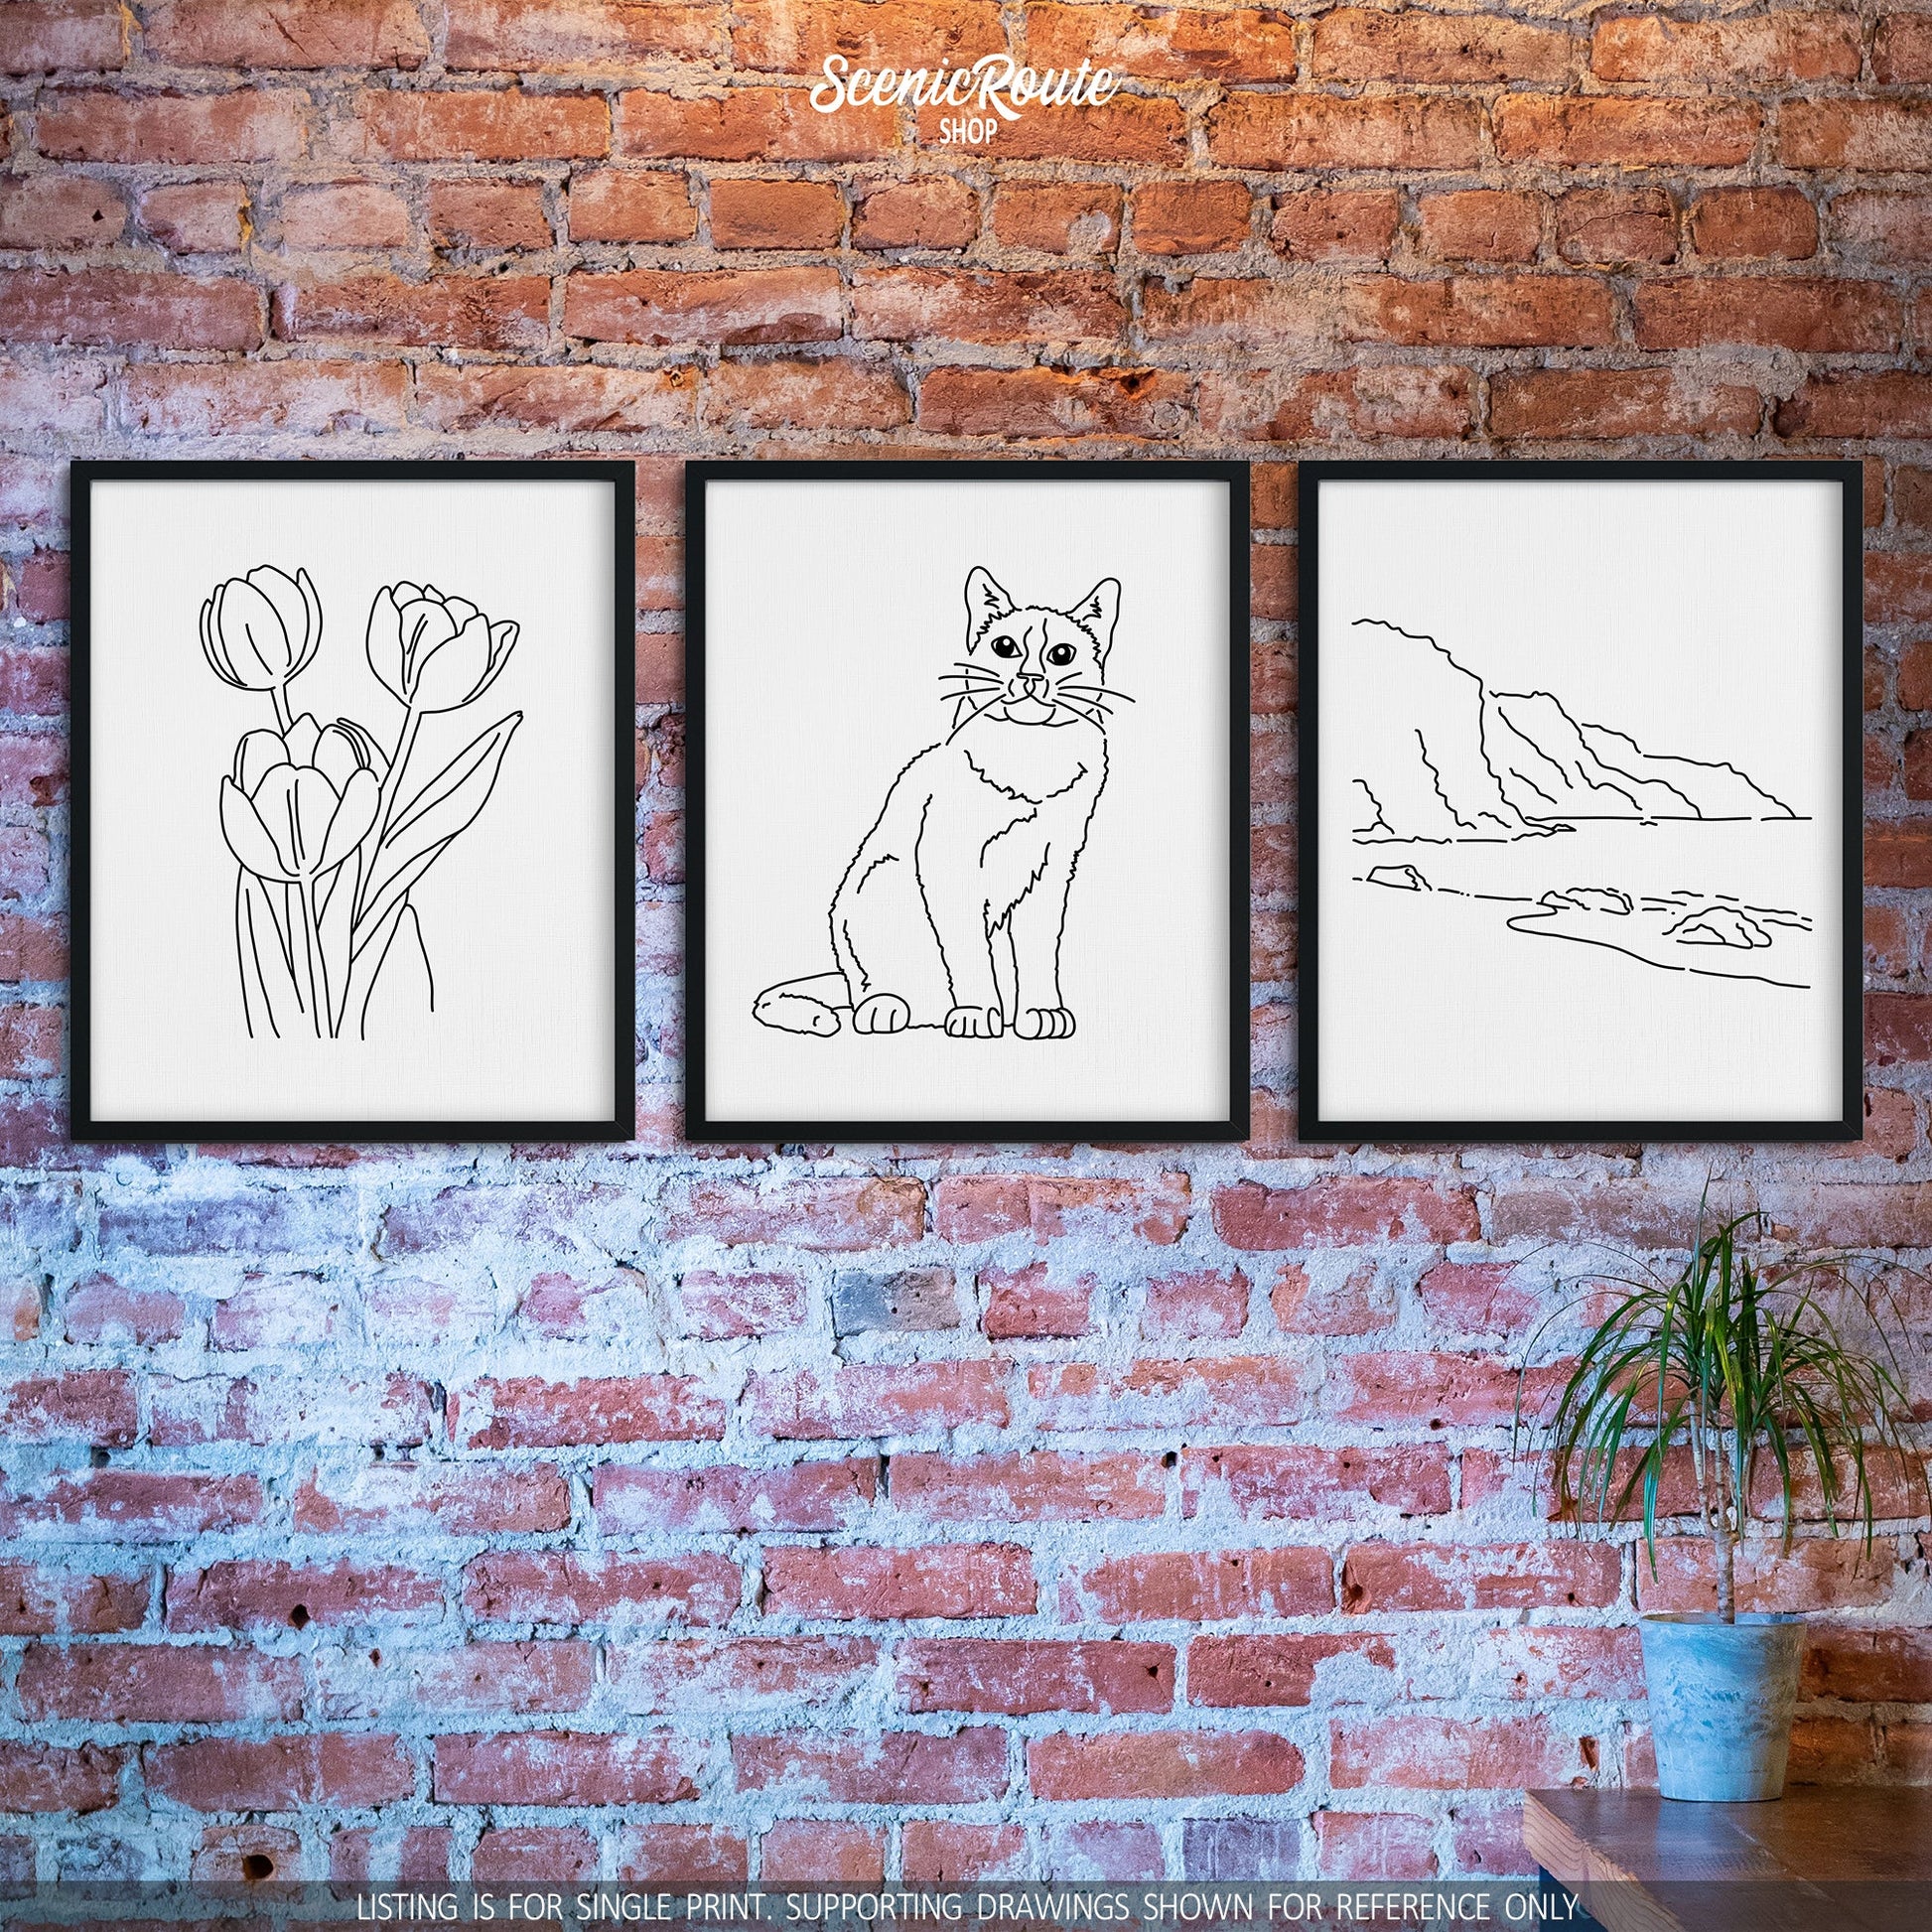 A group of three framed drawings on a brick wall. The line art drawings include Tulip flowers, Snowshoe cat, and NaPali Coast